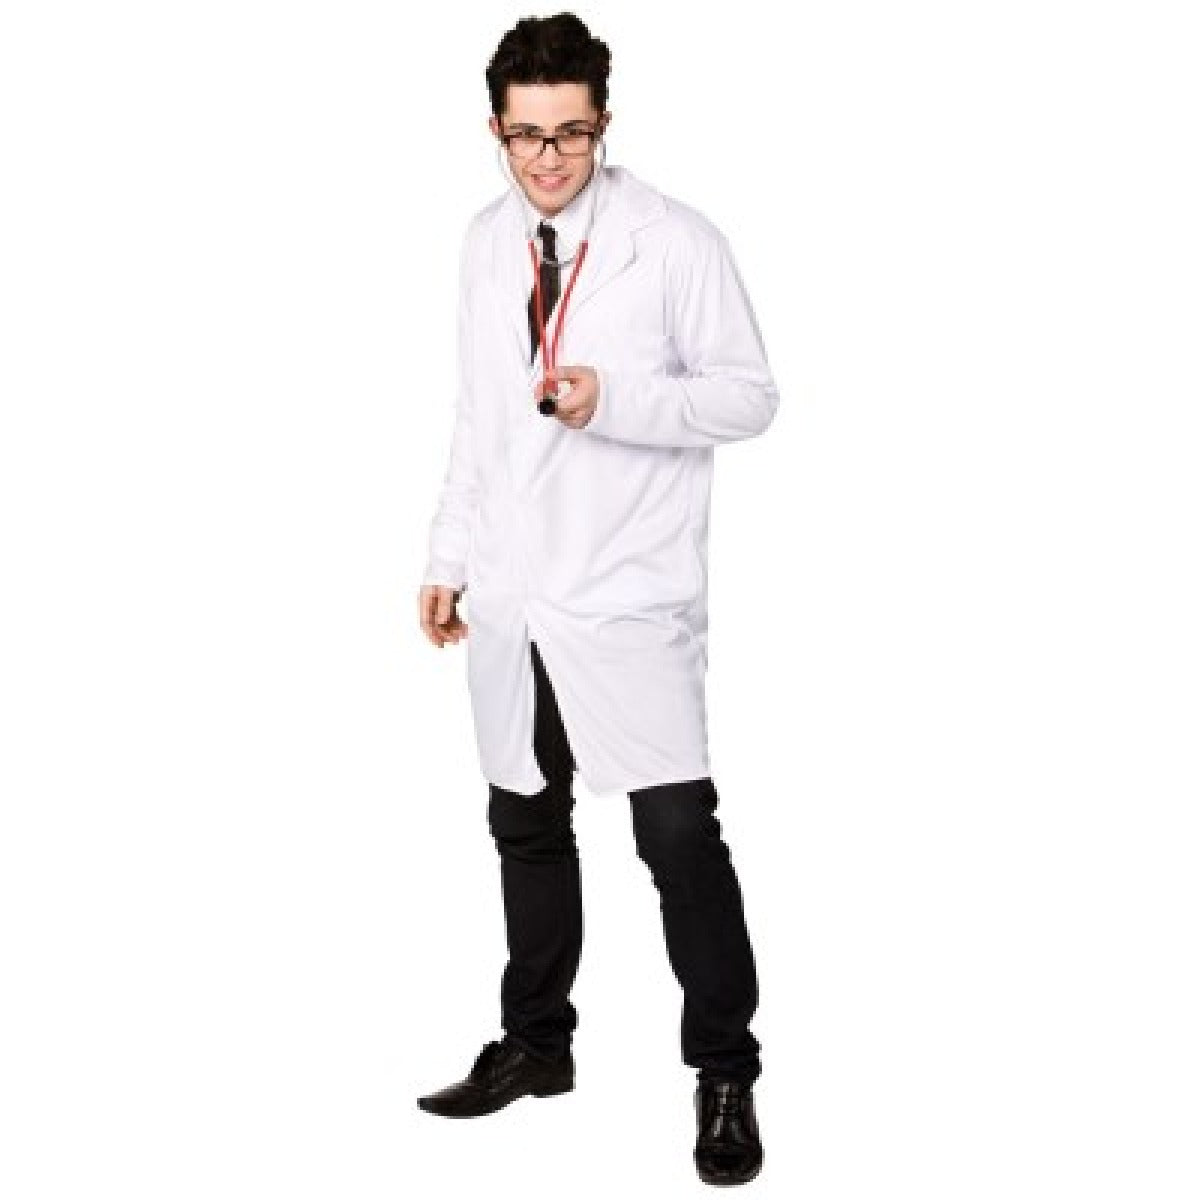 Doctor's Coat Kit - Mad Scientist Style